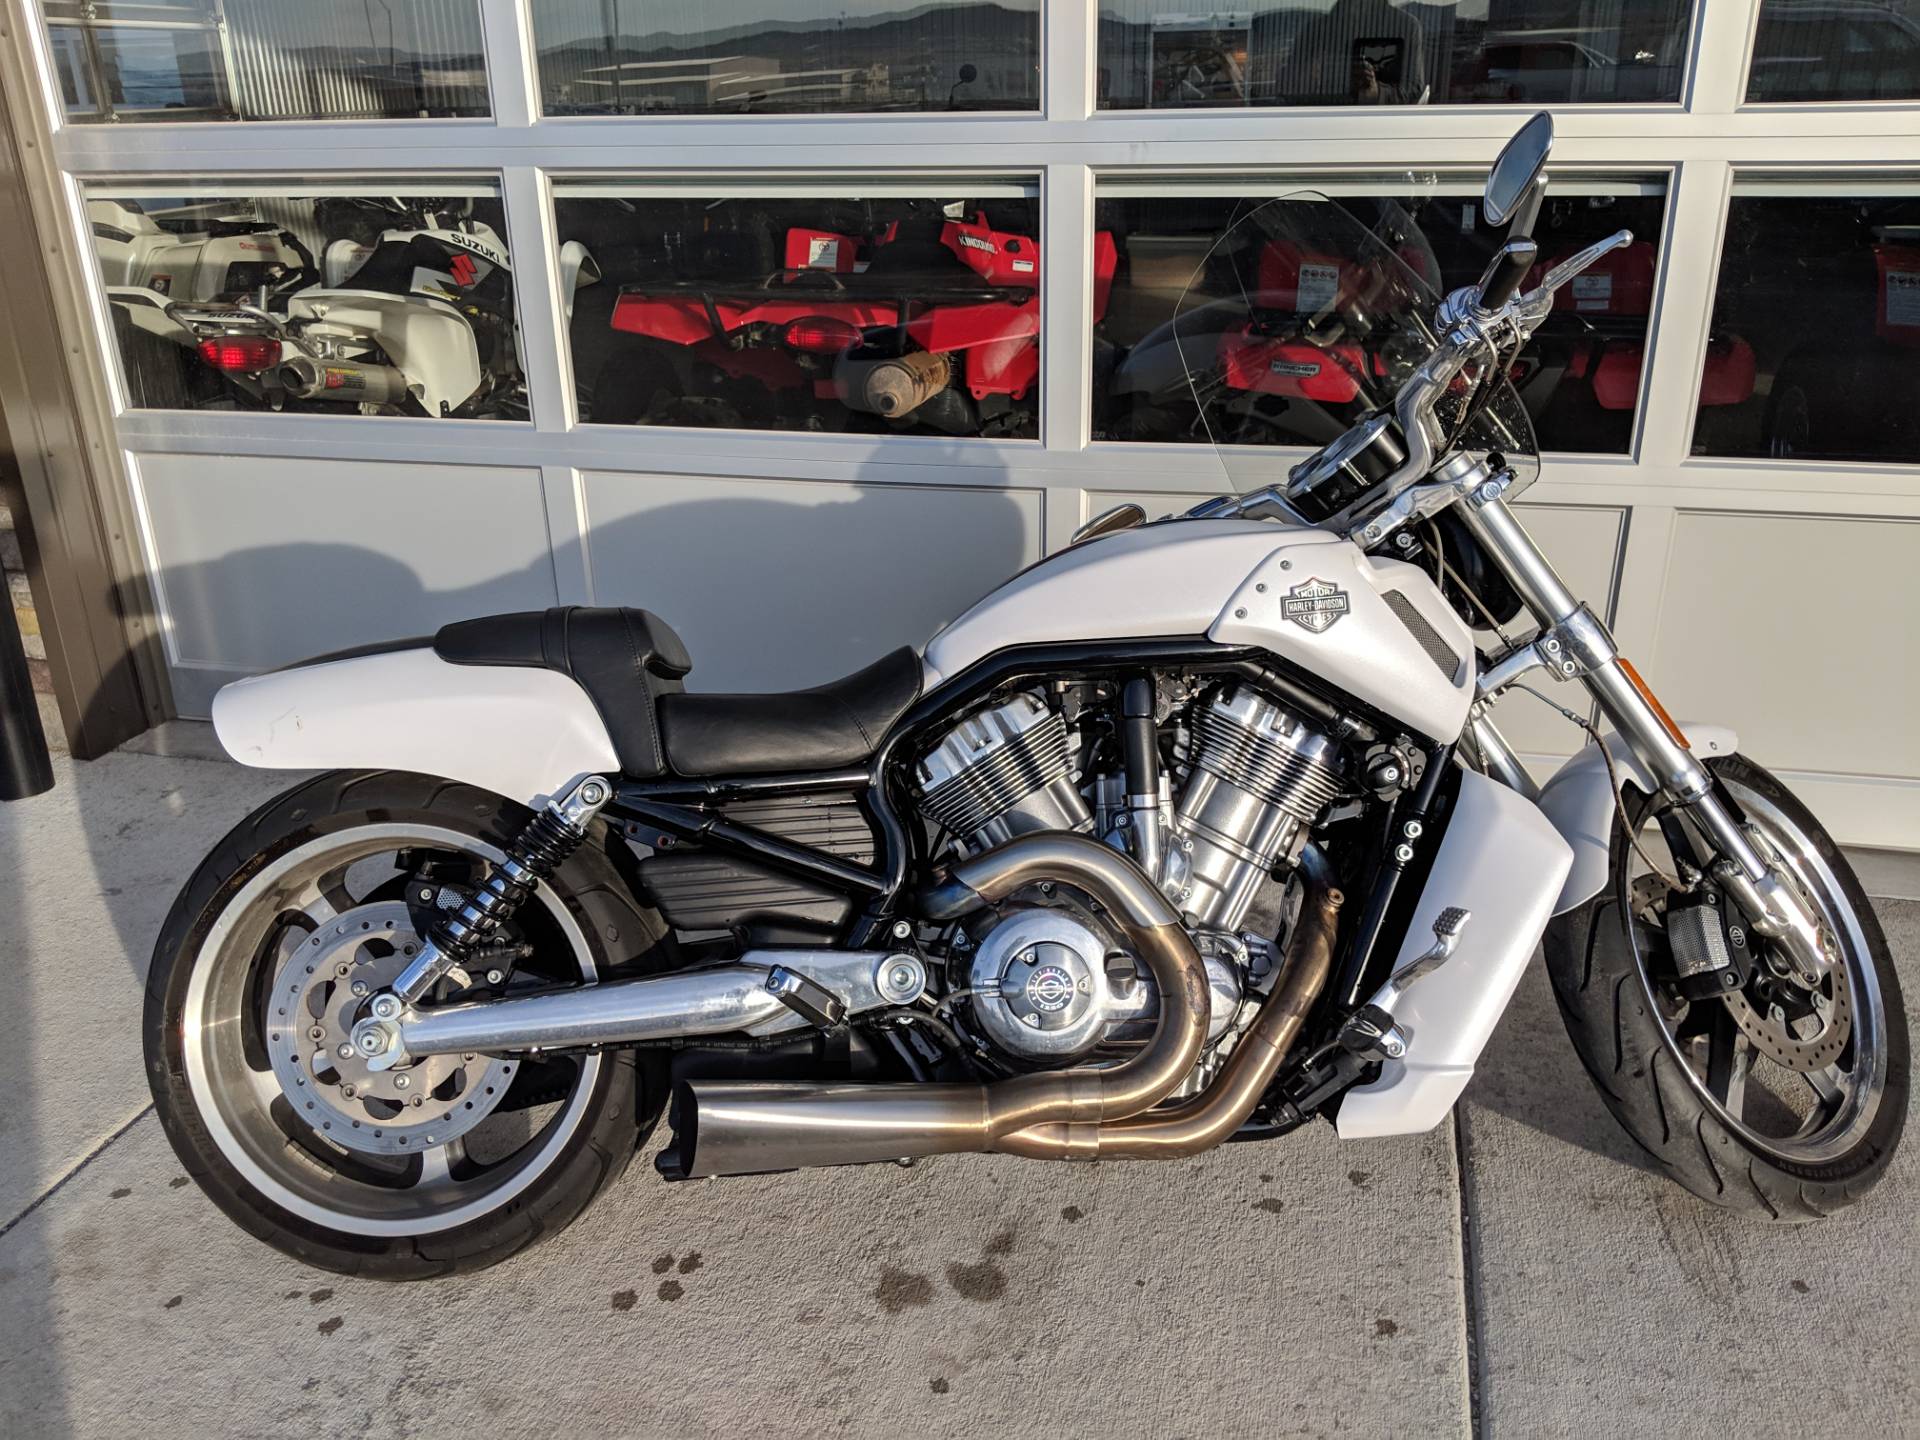 Used 2015 Harley Davidson V Rod Muscle Motorcycles In Sunbury Oh